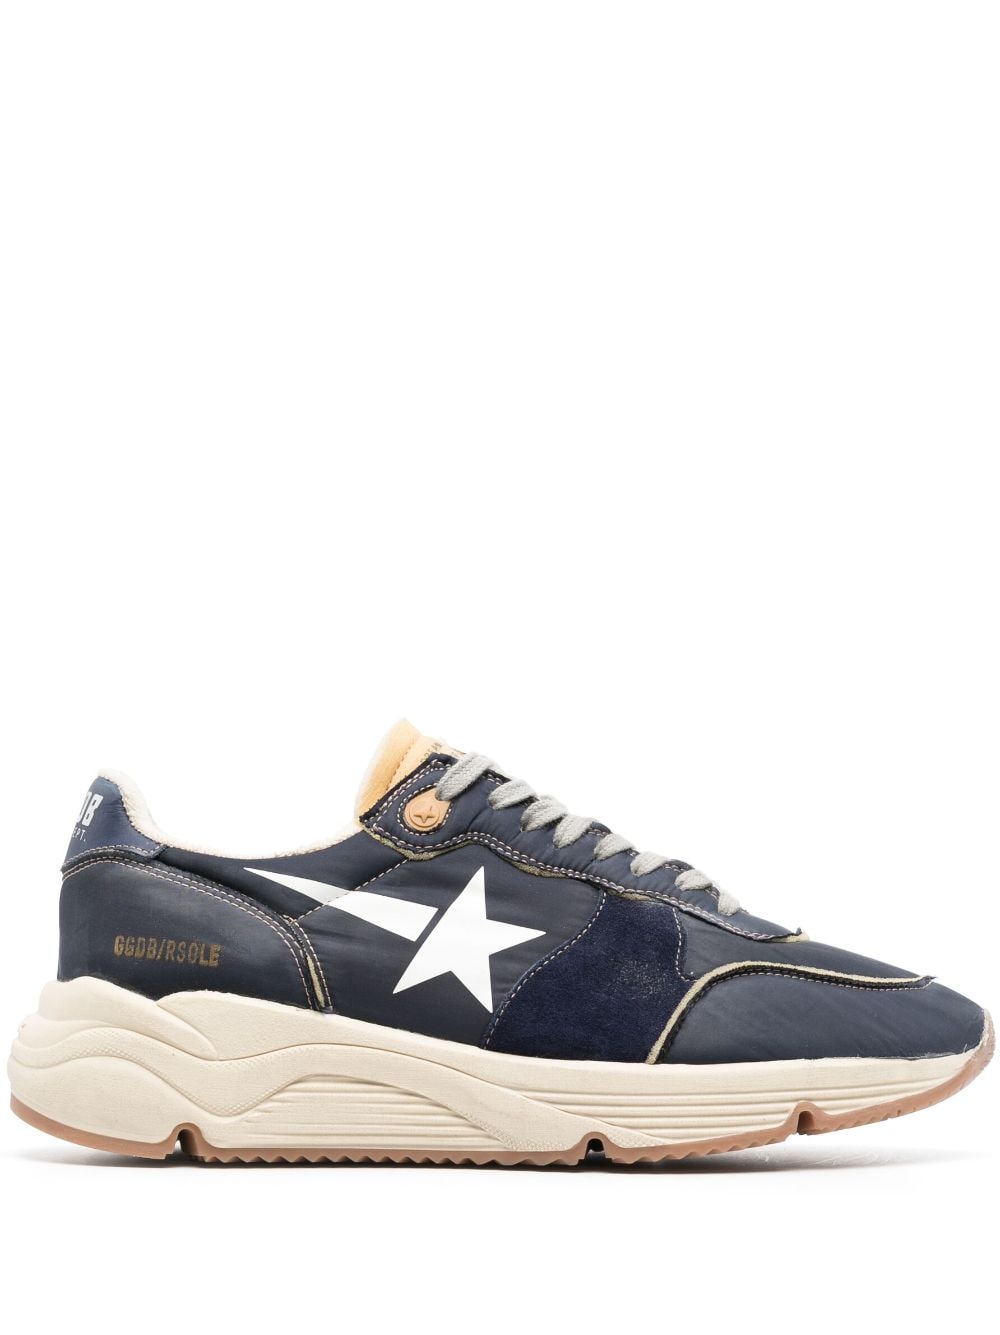 GOLDEN GOOSE RUNNING SOLE LEATHER SNEAKERS